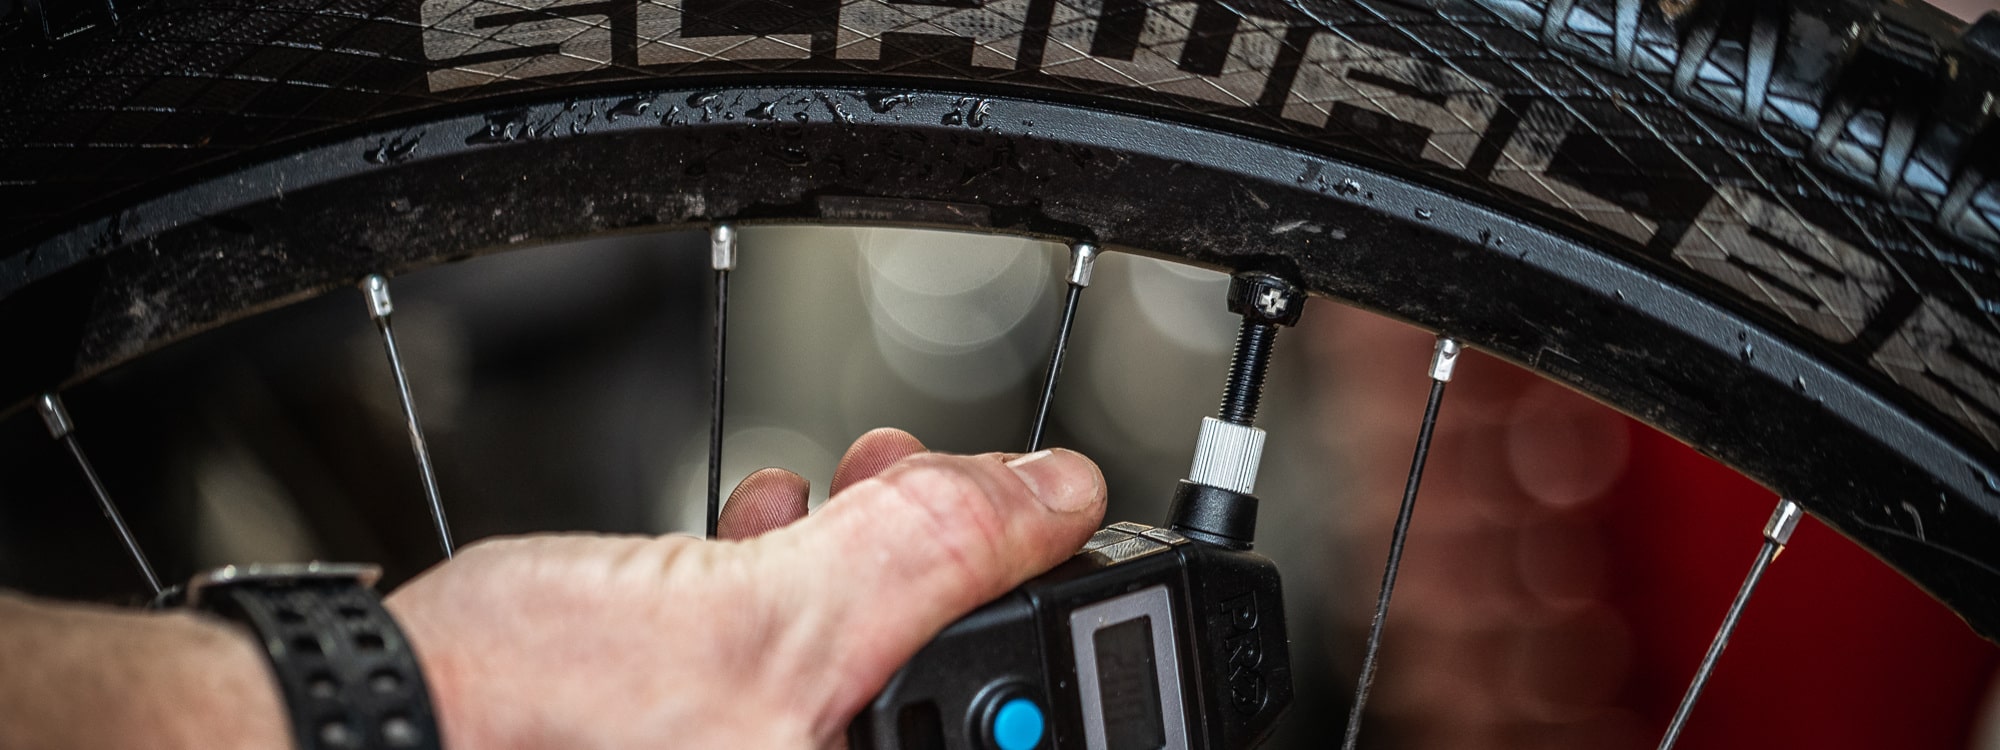 How to service your bike on a regular basis